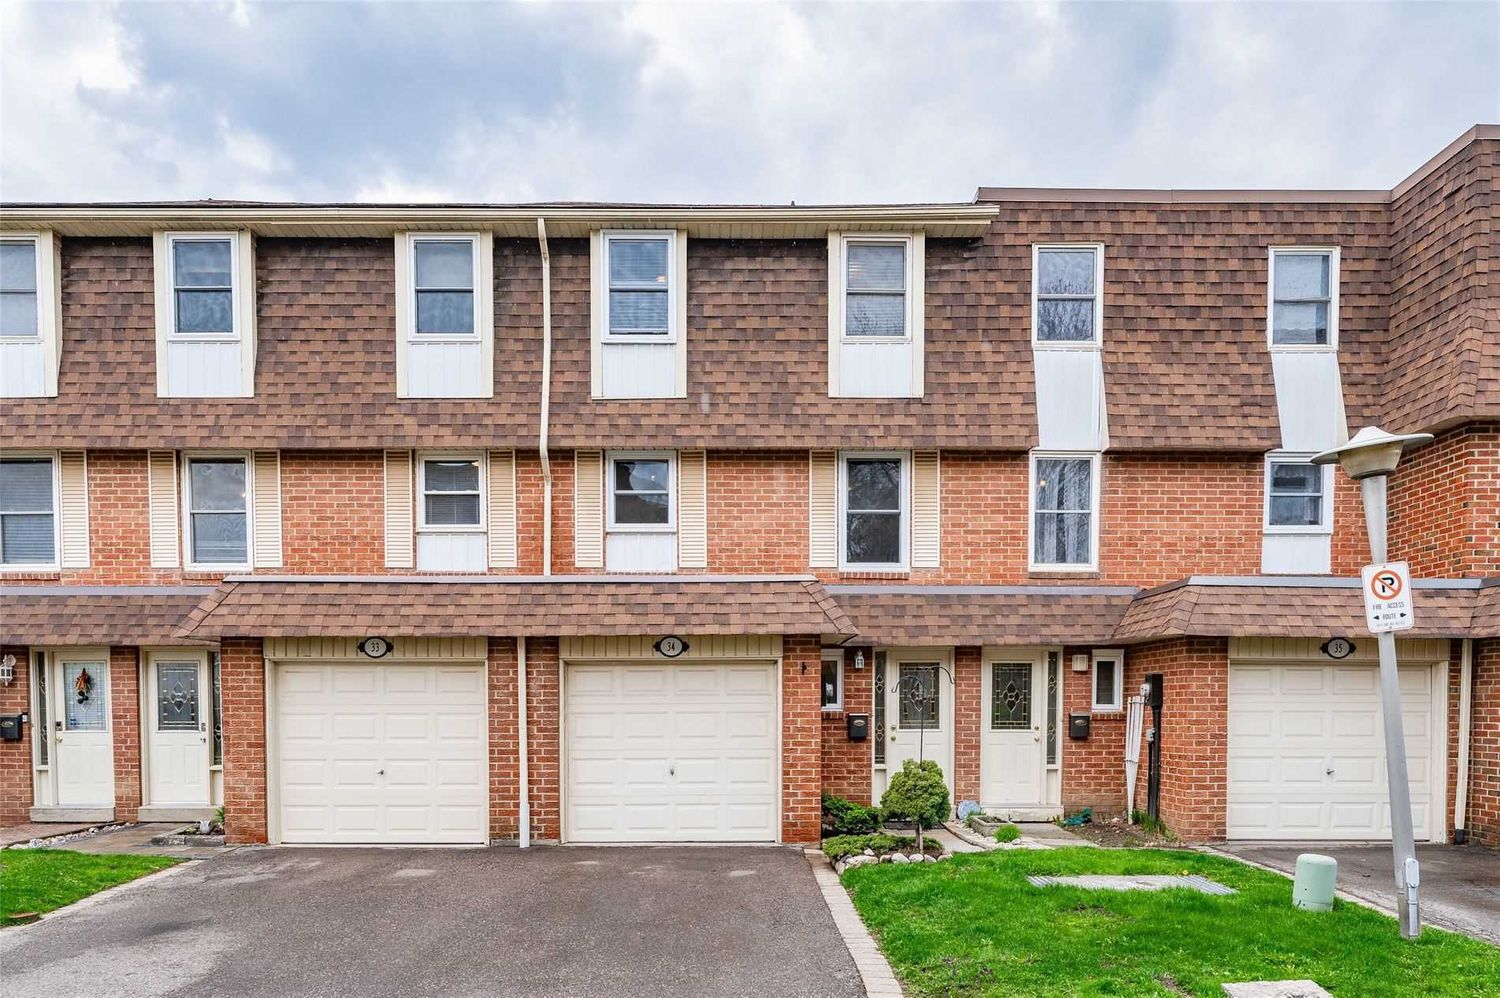 30 Heslop Road. 30 Heslop Road Townhomes is located in  Milton, Toronto - image #1 of 3